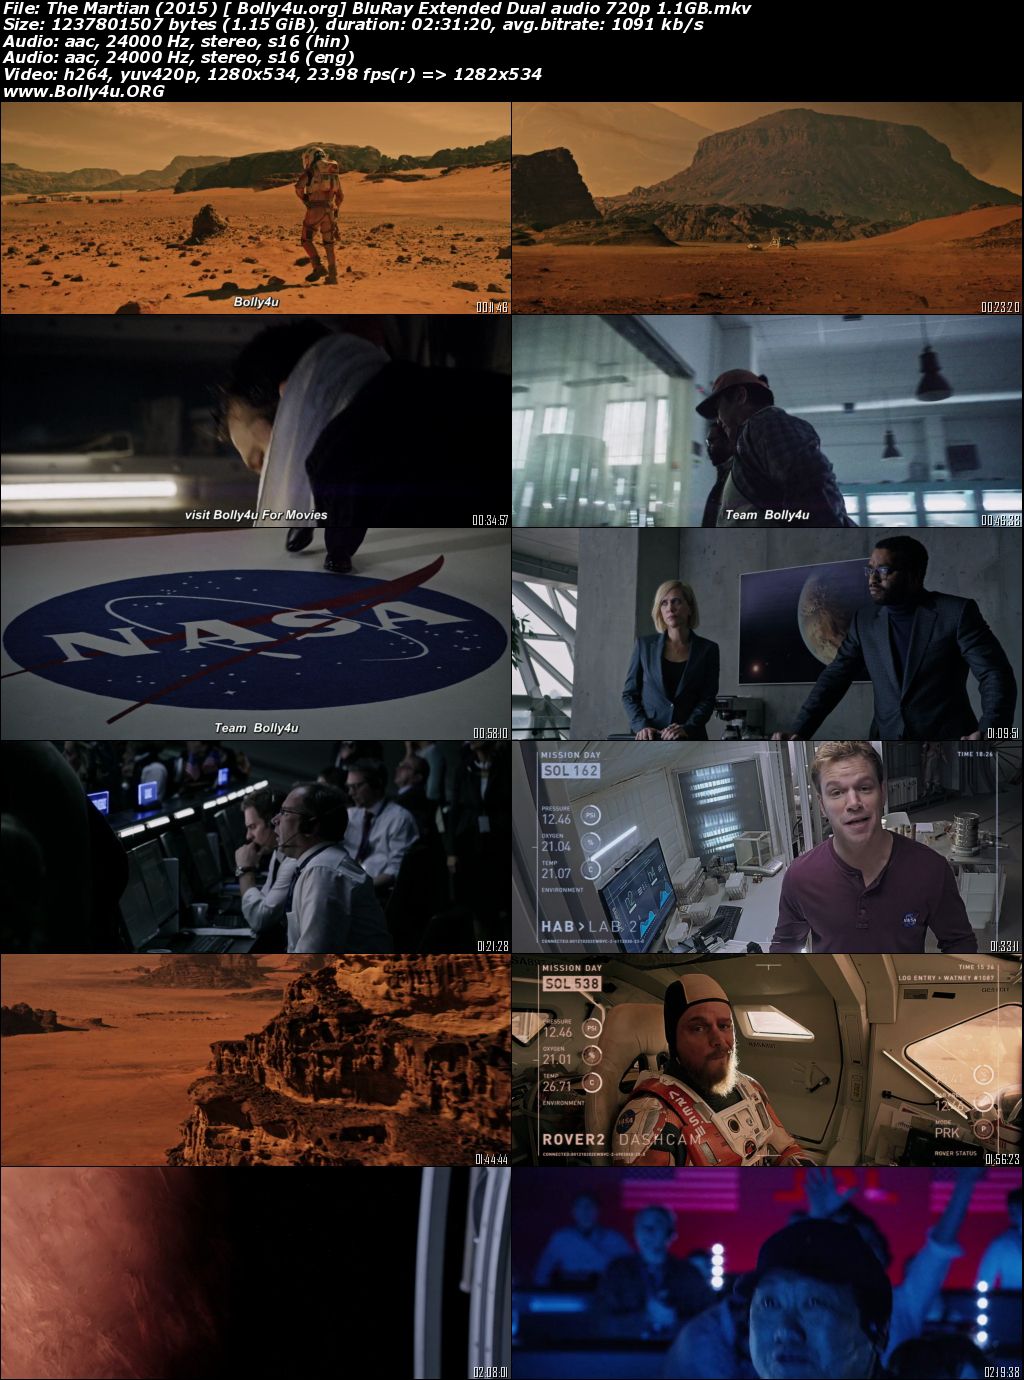 The Martian 2015 BRRip Extended Hindi Dual Audio 720p Download